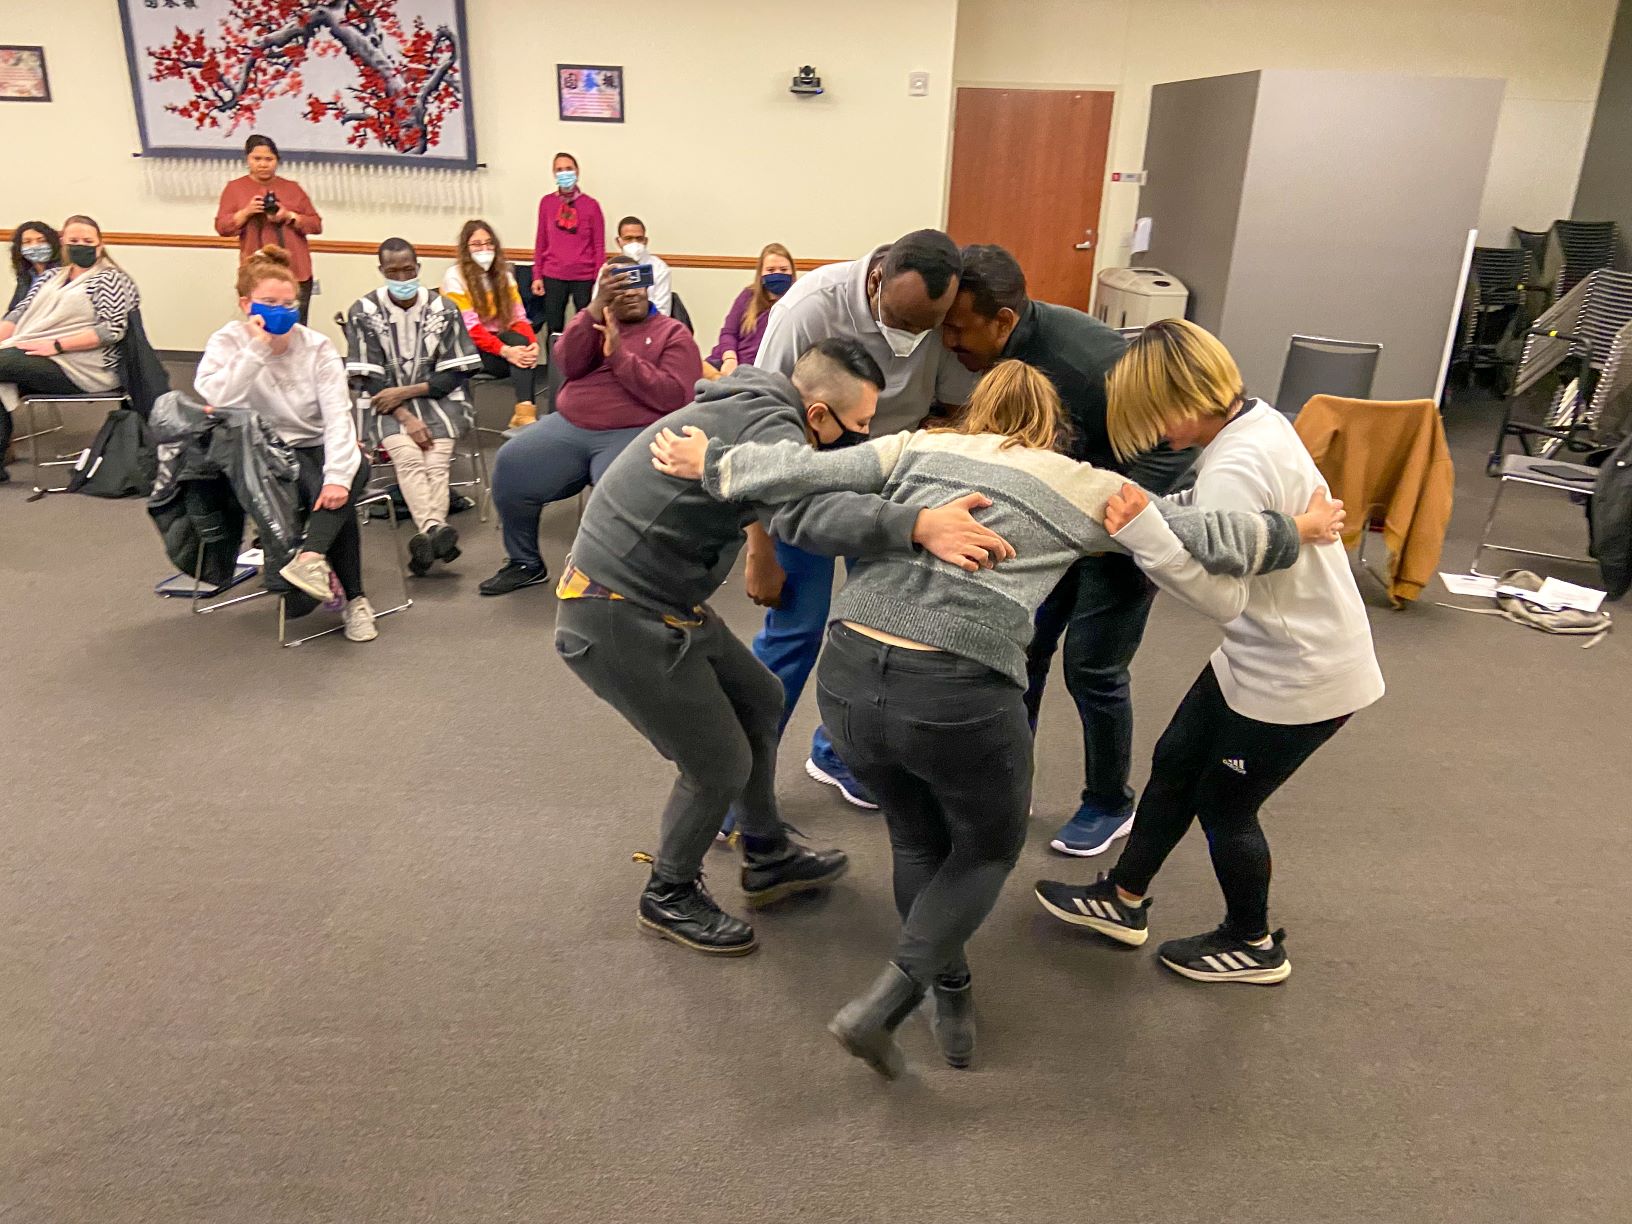 International and domestic students worked together in small groups during the Mar. 22 joint session with the Intensive English Program and TEAC 813J Intercultural Communication to share migration stories through dance. // Crystal Bock Thiessen